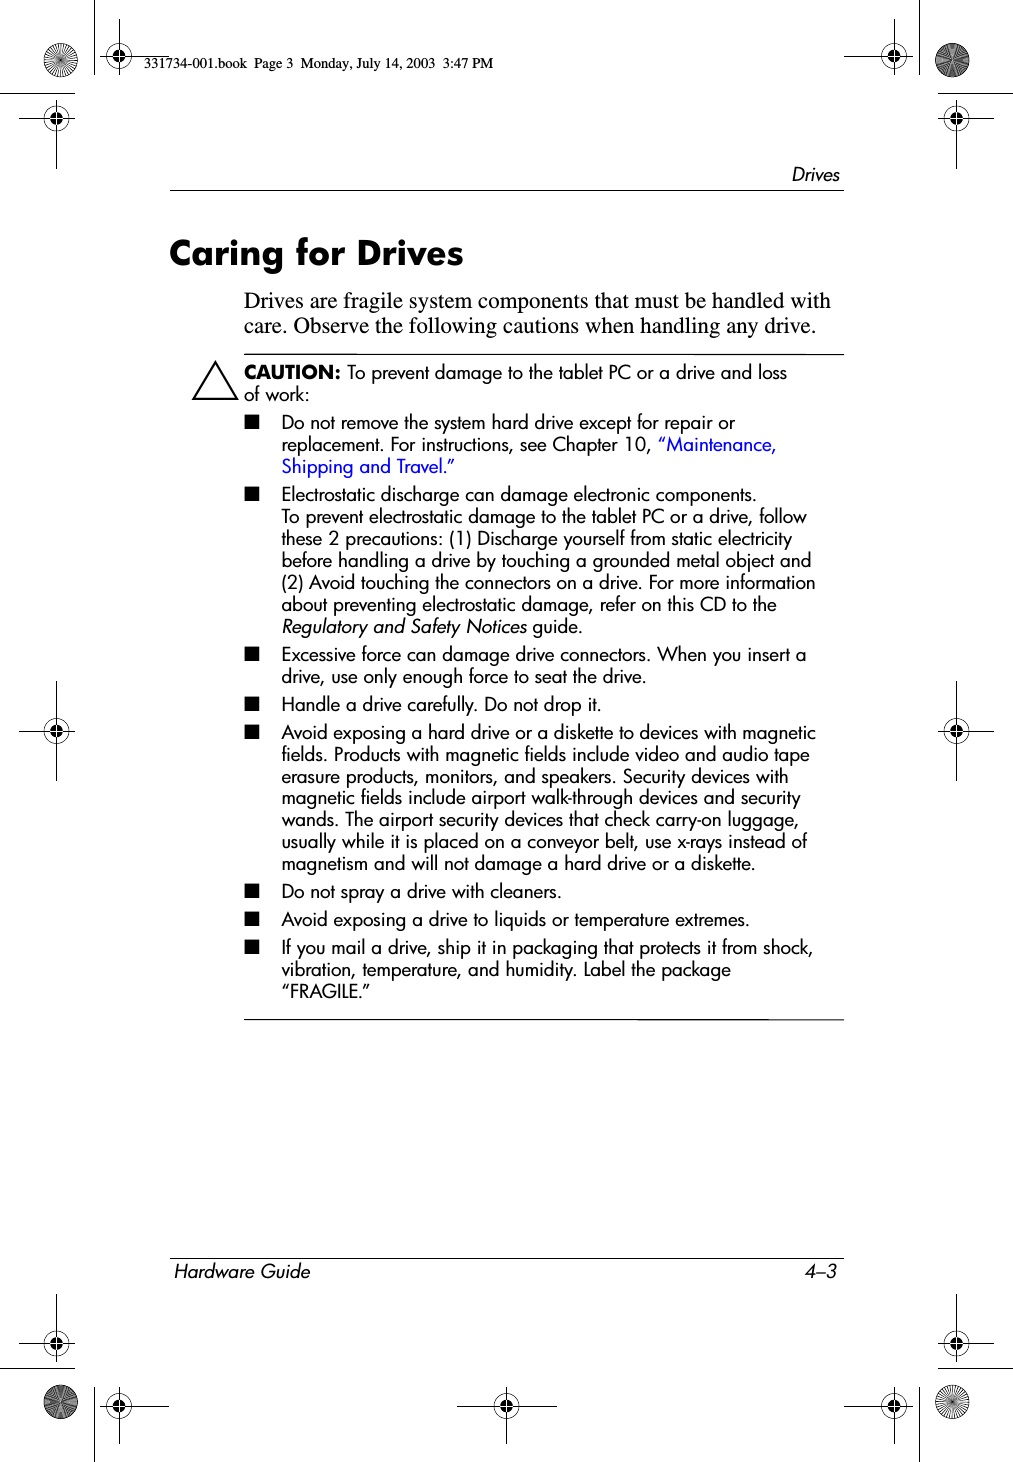 DrivesHardware Guide 4–3Caring for DrivesDrives are fragile system components that must be handled with care. Observe the following cautions when handling any drive.ÄCAUTION: To prevent damage to the tablet PC or a drive and loss of work:■Do not remove the system hard drive except for repair or replacement. For instructions, see Chapter 10, “Maintenance, Shipping and Travel.”■Electrostatic discharge can damage electronic components. To prevent electrostatic damage to the tablet PC or a drive, follow these 2 precautions: (1) Discharge yourself from static electricity before handling a drive by touching a grounded metal object and (2) Avoid touching the connectors on a drive. For more information about preventing electrostatic damage, refer on this CD to the Regulatory and Safety Notices guide.■Excessive force can damage drive connectors. When you insert a drive, use only enough force to seat the drive.■Handle a drive carefully. Do not drop it.■Avoid exposing a hard drive or a diskette to devices with magnetic fields. Products with magnetic fields include video and audio tape erasure products, monitors, and speakers. Security devices with magnetic fields include airport walk-through devices and security wands. The airport security devices that check carry-on luggage, usually while it is placed on a conveyor belt, use x-rays instead of magnetism and will not damage a hard drive or a diskette.■Do not spray a drive with cleaners.■Avoid exposing a drive to liquids or temperature extremes.■If you mail a drive, ship it in packaging that protects it from shock, vibration, temperature, and humidity. Label the package “FRAGILE.”331734-001.book  Page 3  Monday, July 14, 2003  3:47 PM